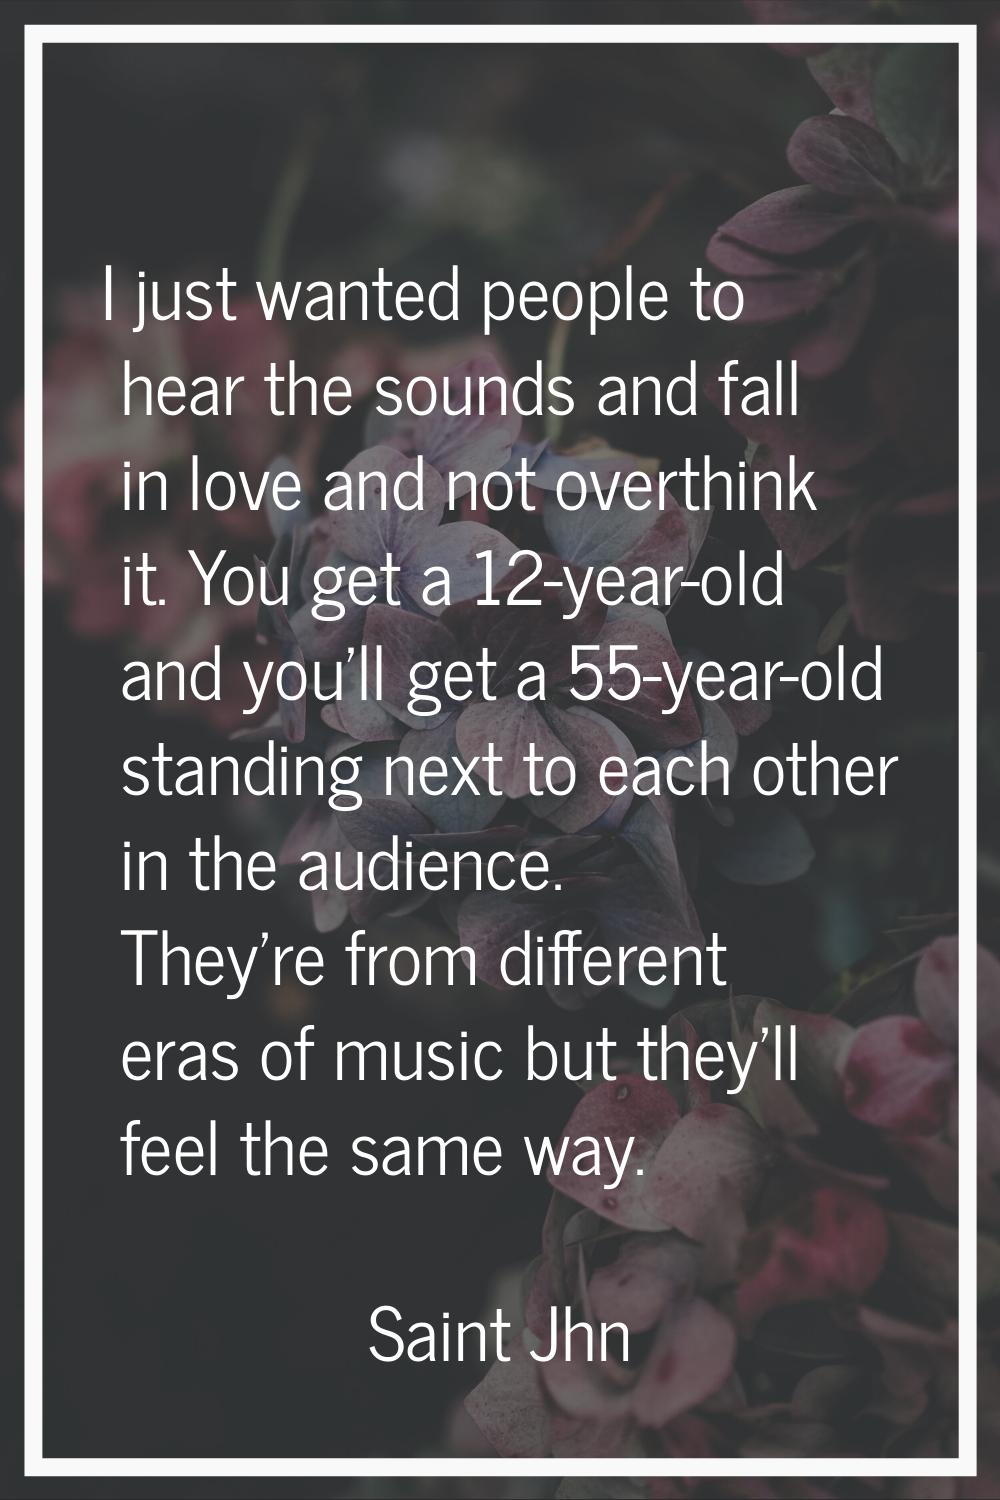 I just wanted people to hear the sounds and fall in love and not overthink it. You get a 12-year-ol